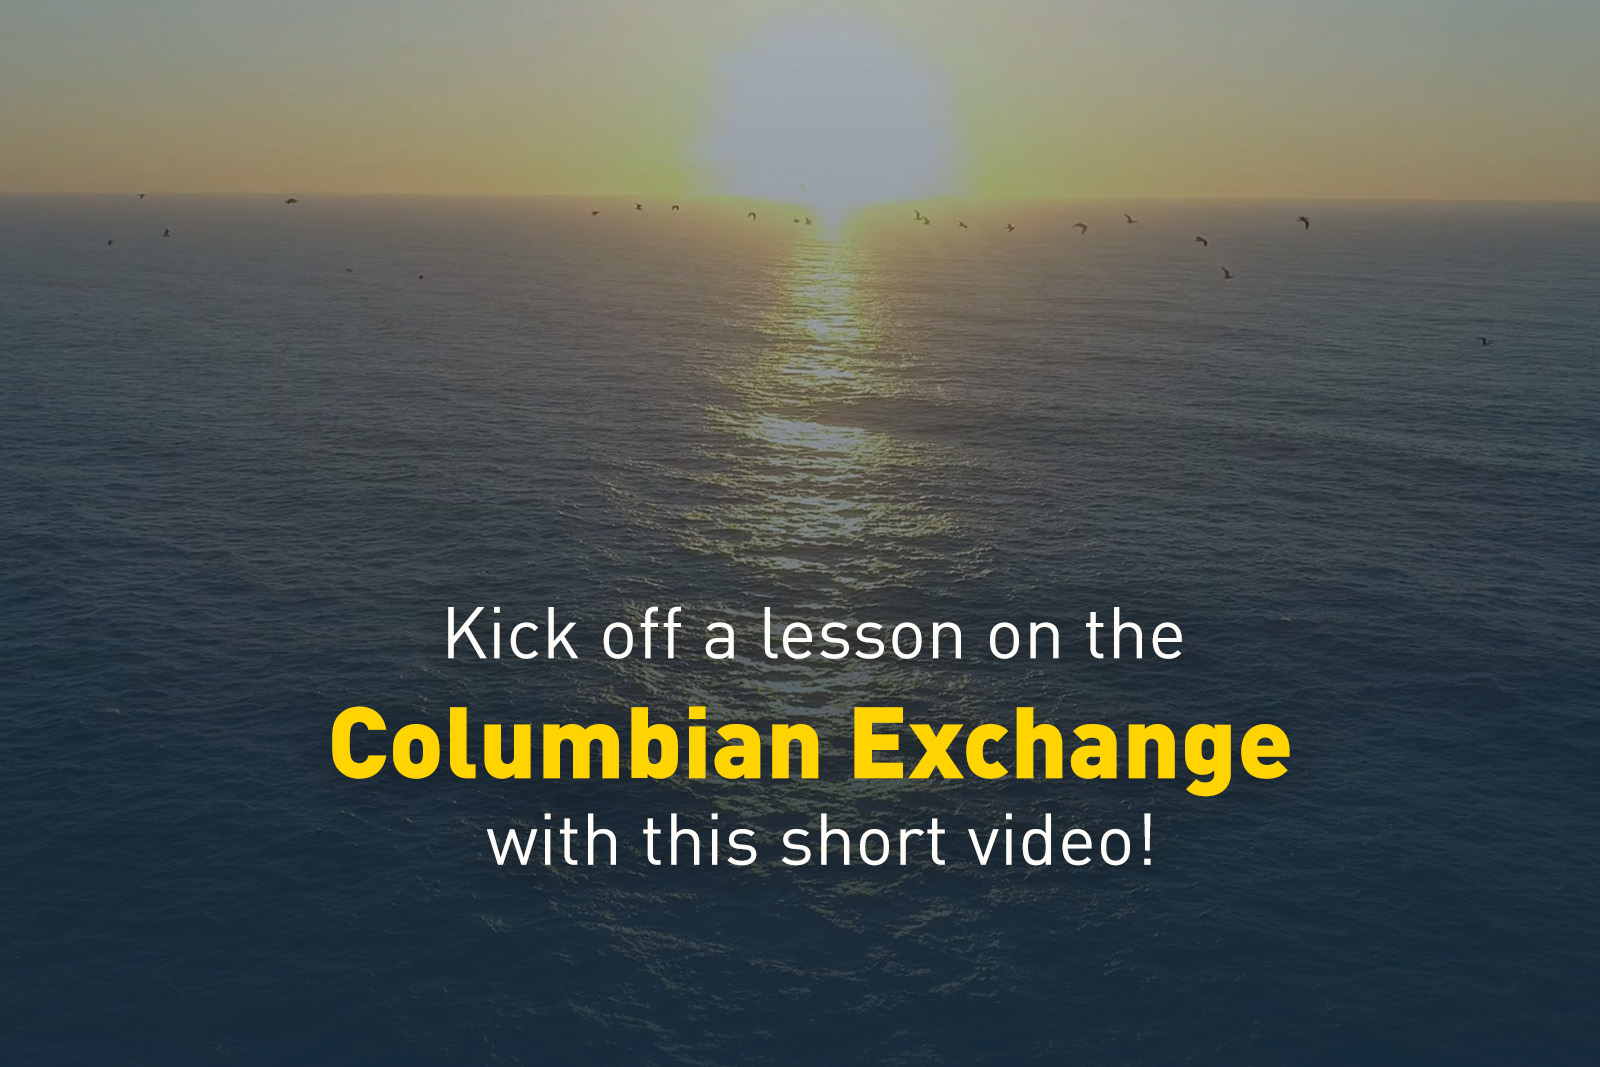 Kick off a lesson on the Columbian Exchange with this short video!